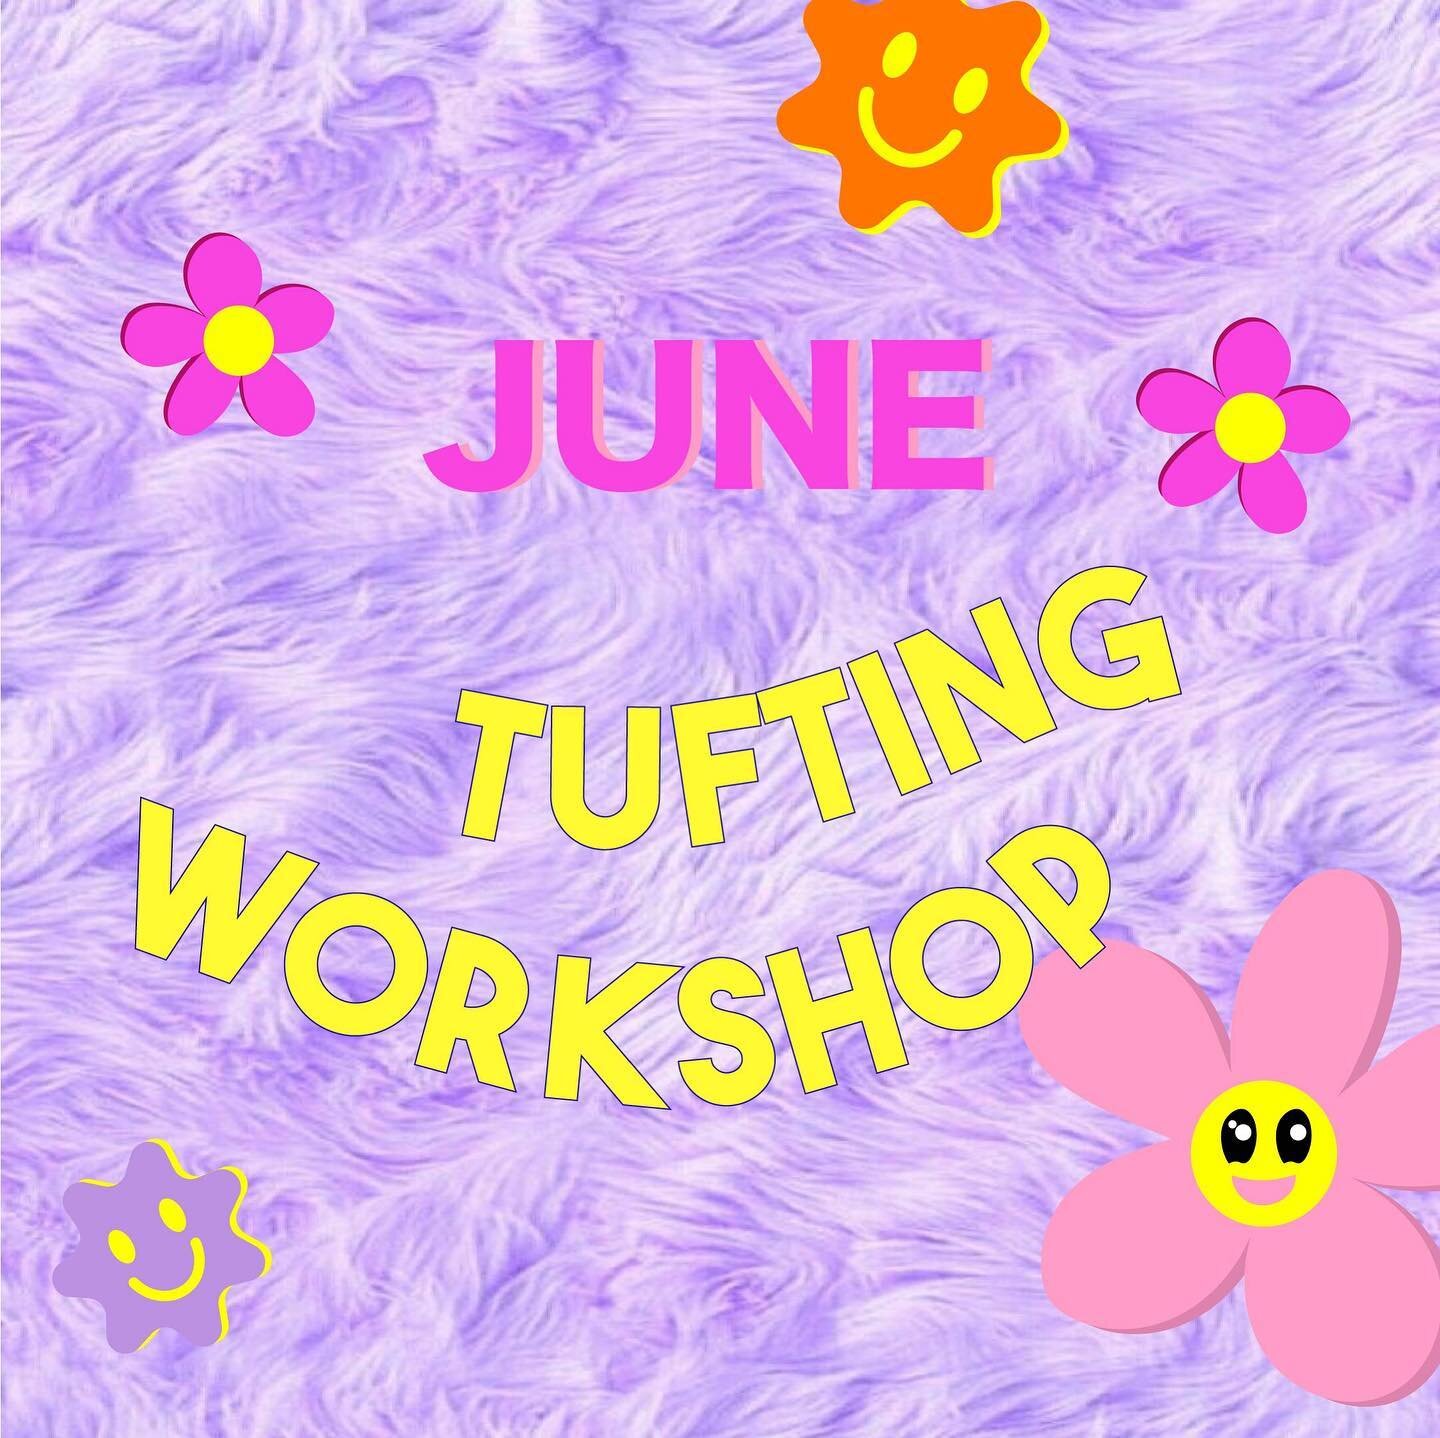 🌻 JUNE TUFTING WORKSHOPS are here 🎉

Come and make your own fluffy design with us 💖
At @contemporaryartstudio.bcn 

👉🏻 link for info &amp; reservation in Bio 
👉🏻 enlace para m&aacute;s info y reservaciones en la Bio 
.
.
.
#tuftingworkshop #tu